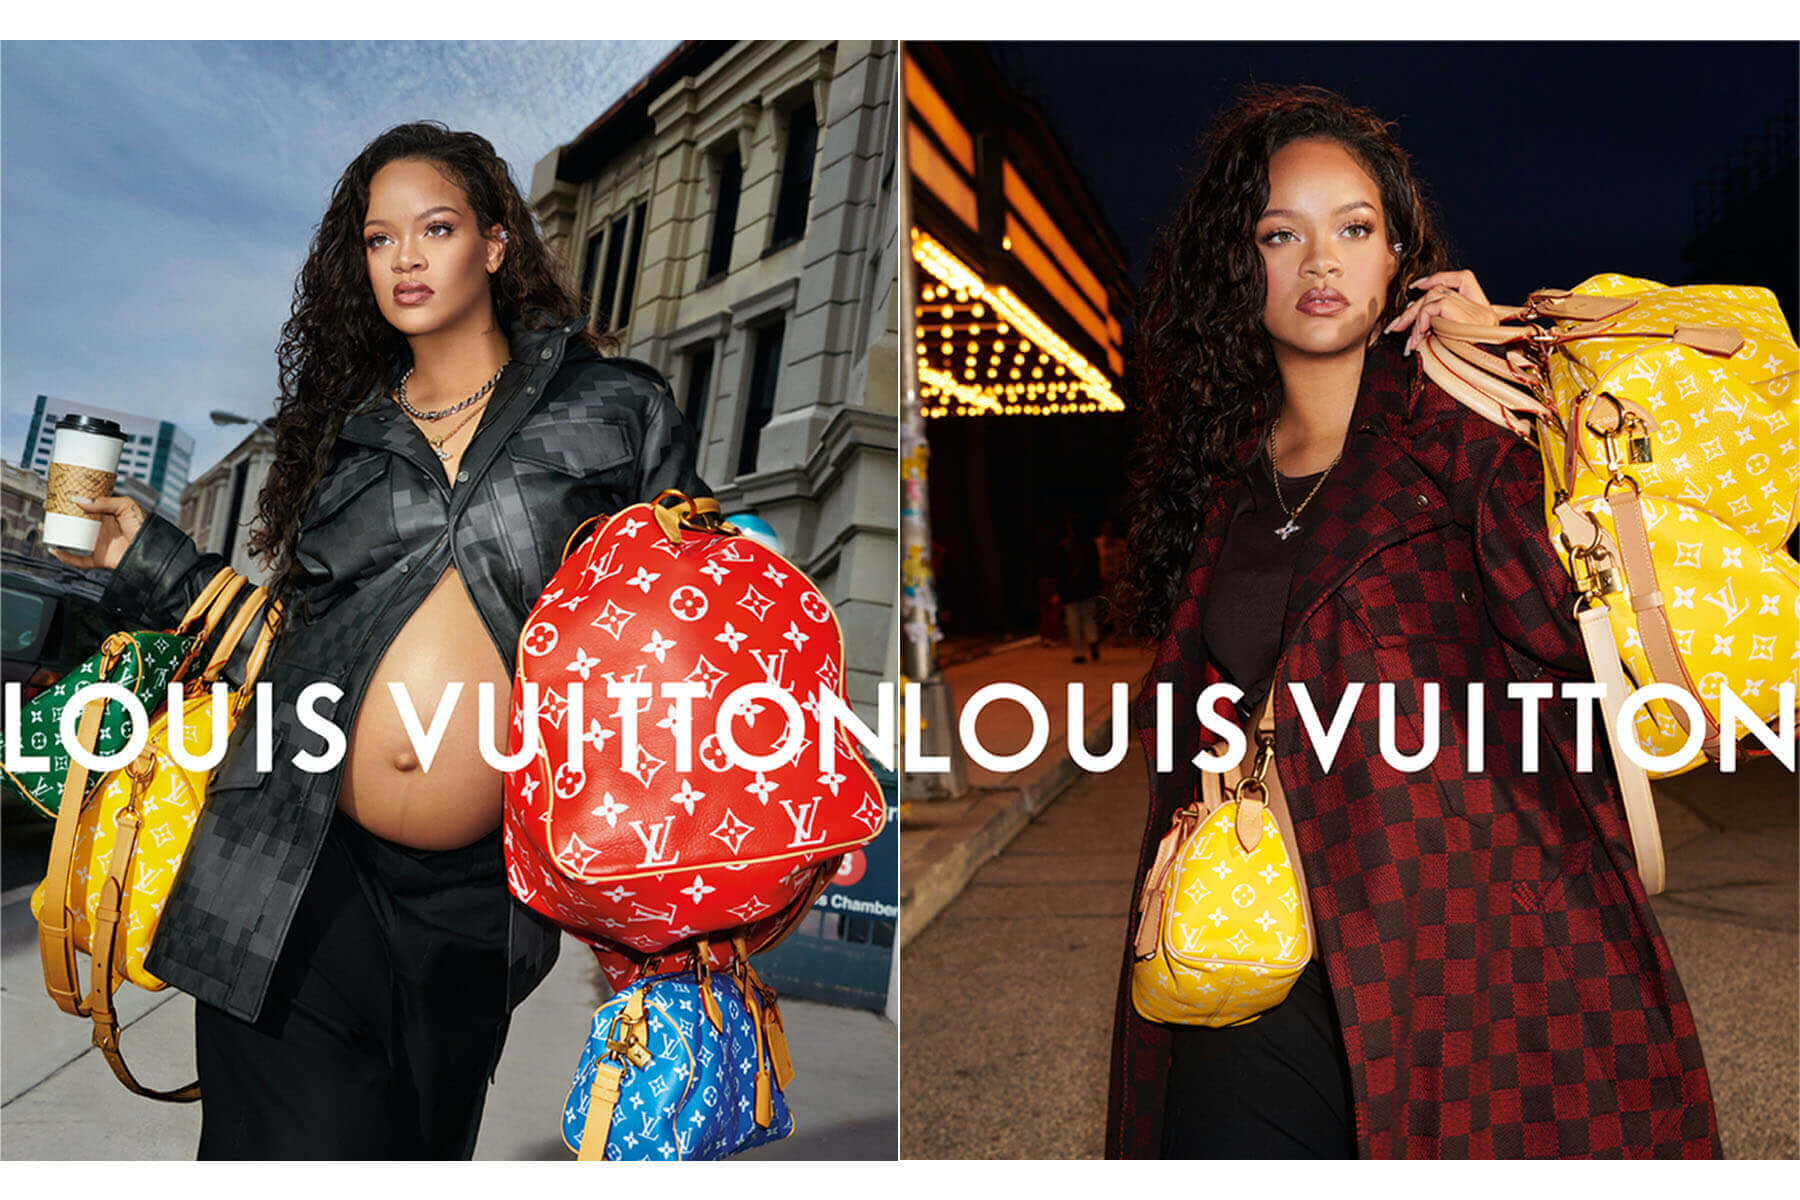 Rihanna Featured in New Louis Vuitton Campaign